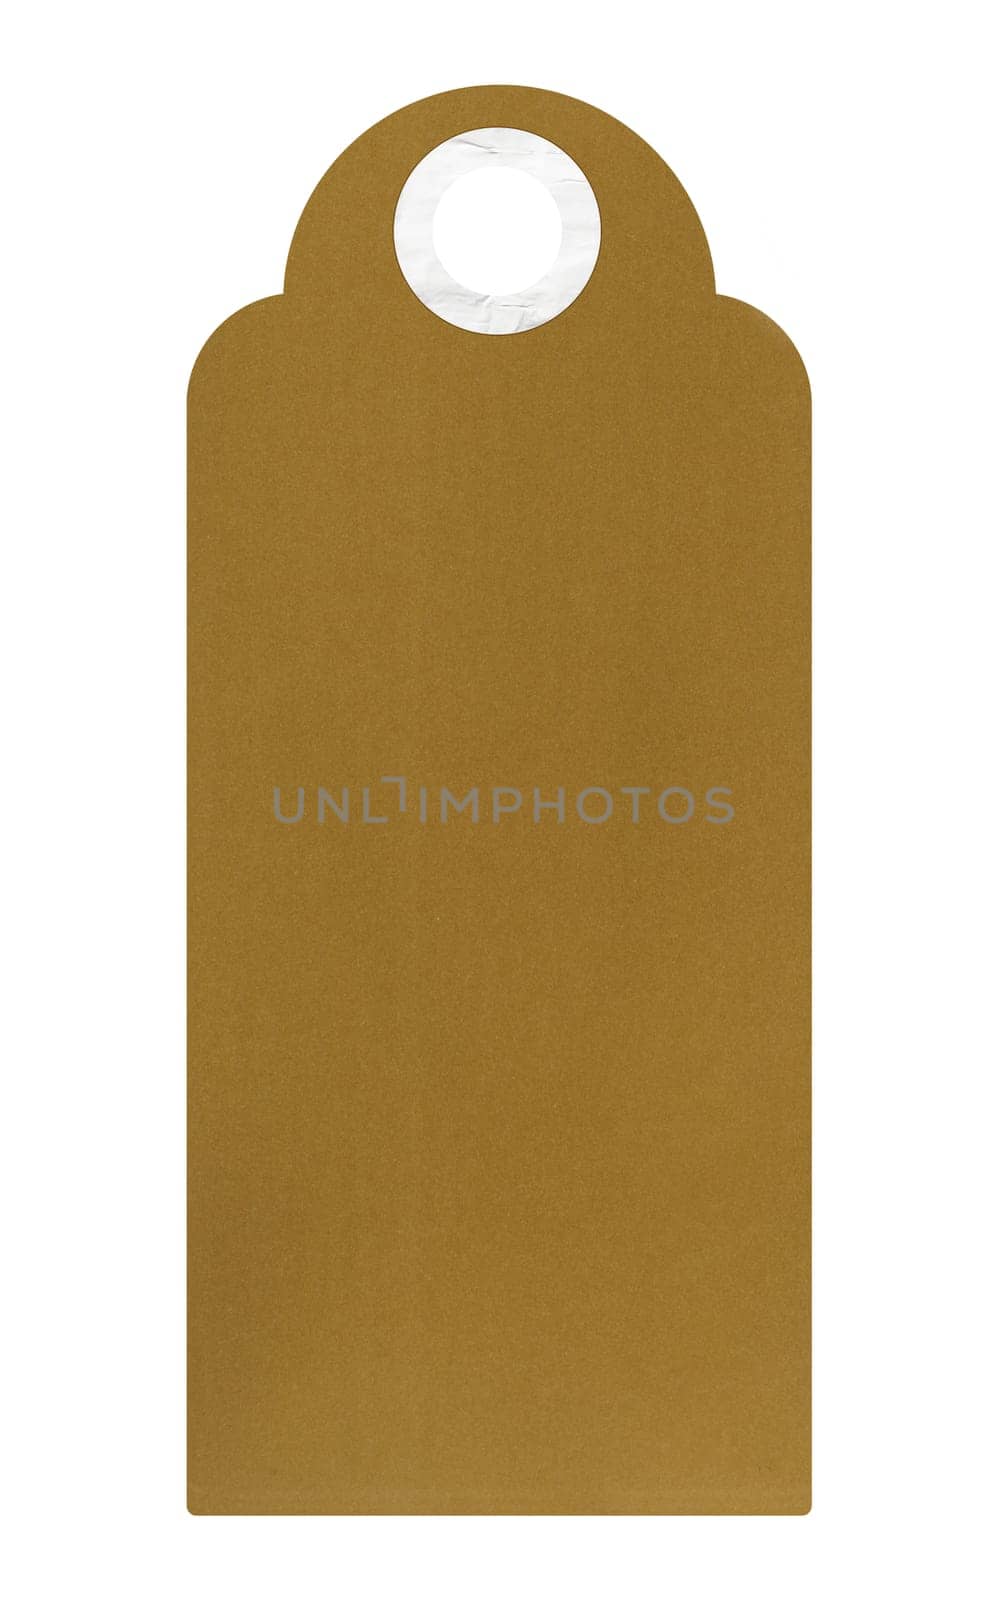 Blank brown rectangular paper tag on a white background, template for price, discount